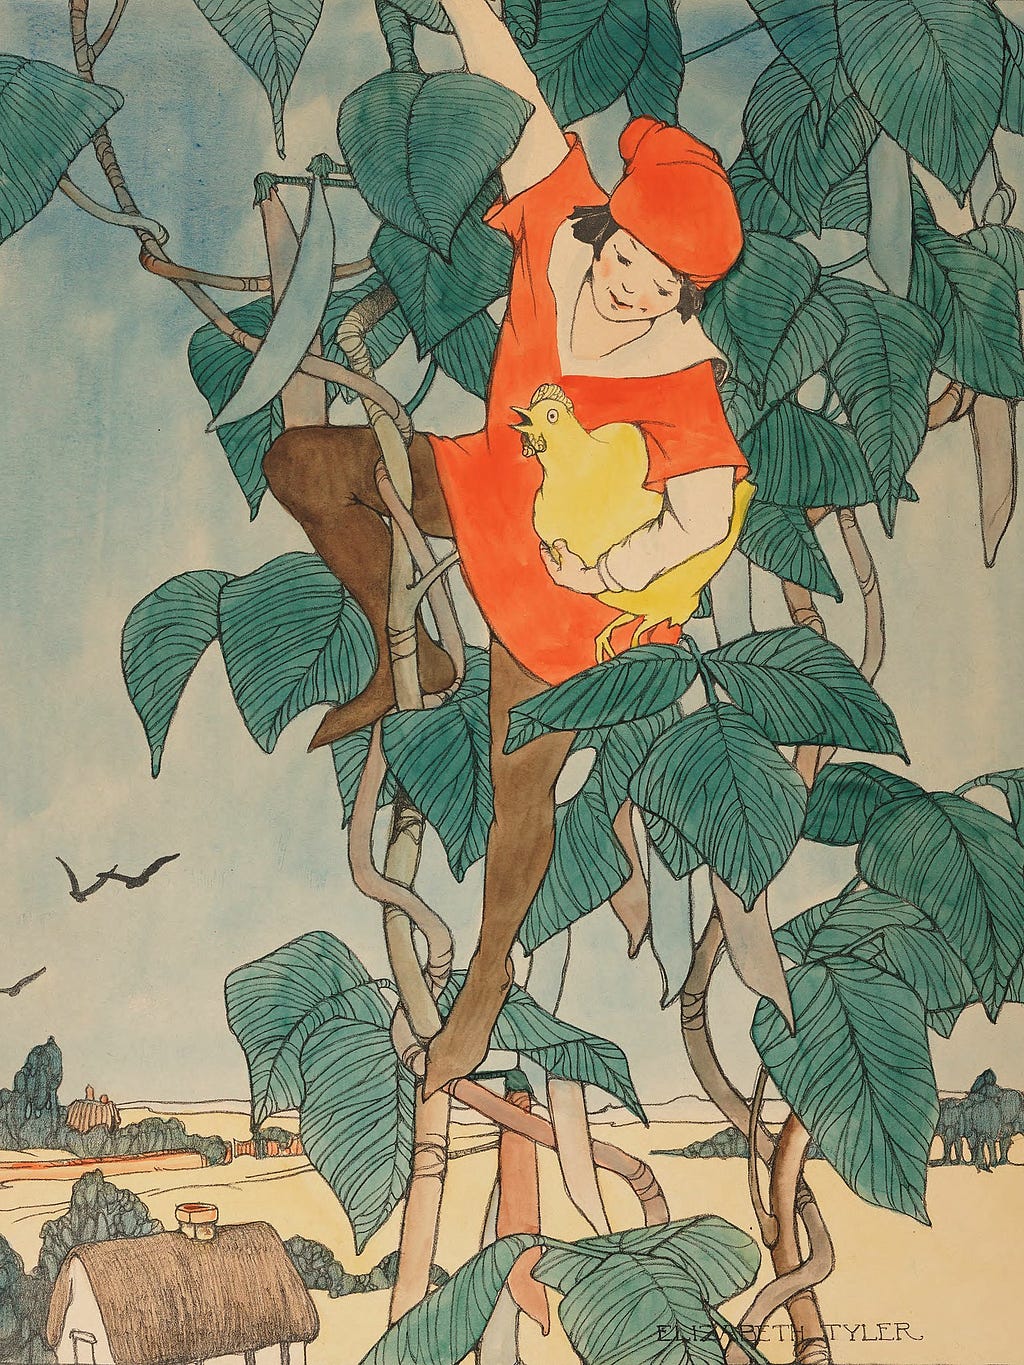 An illustration of Jack descending the giant beanstalk, carrying a golden chicken under his arm.